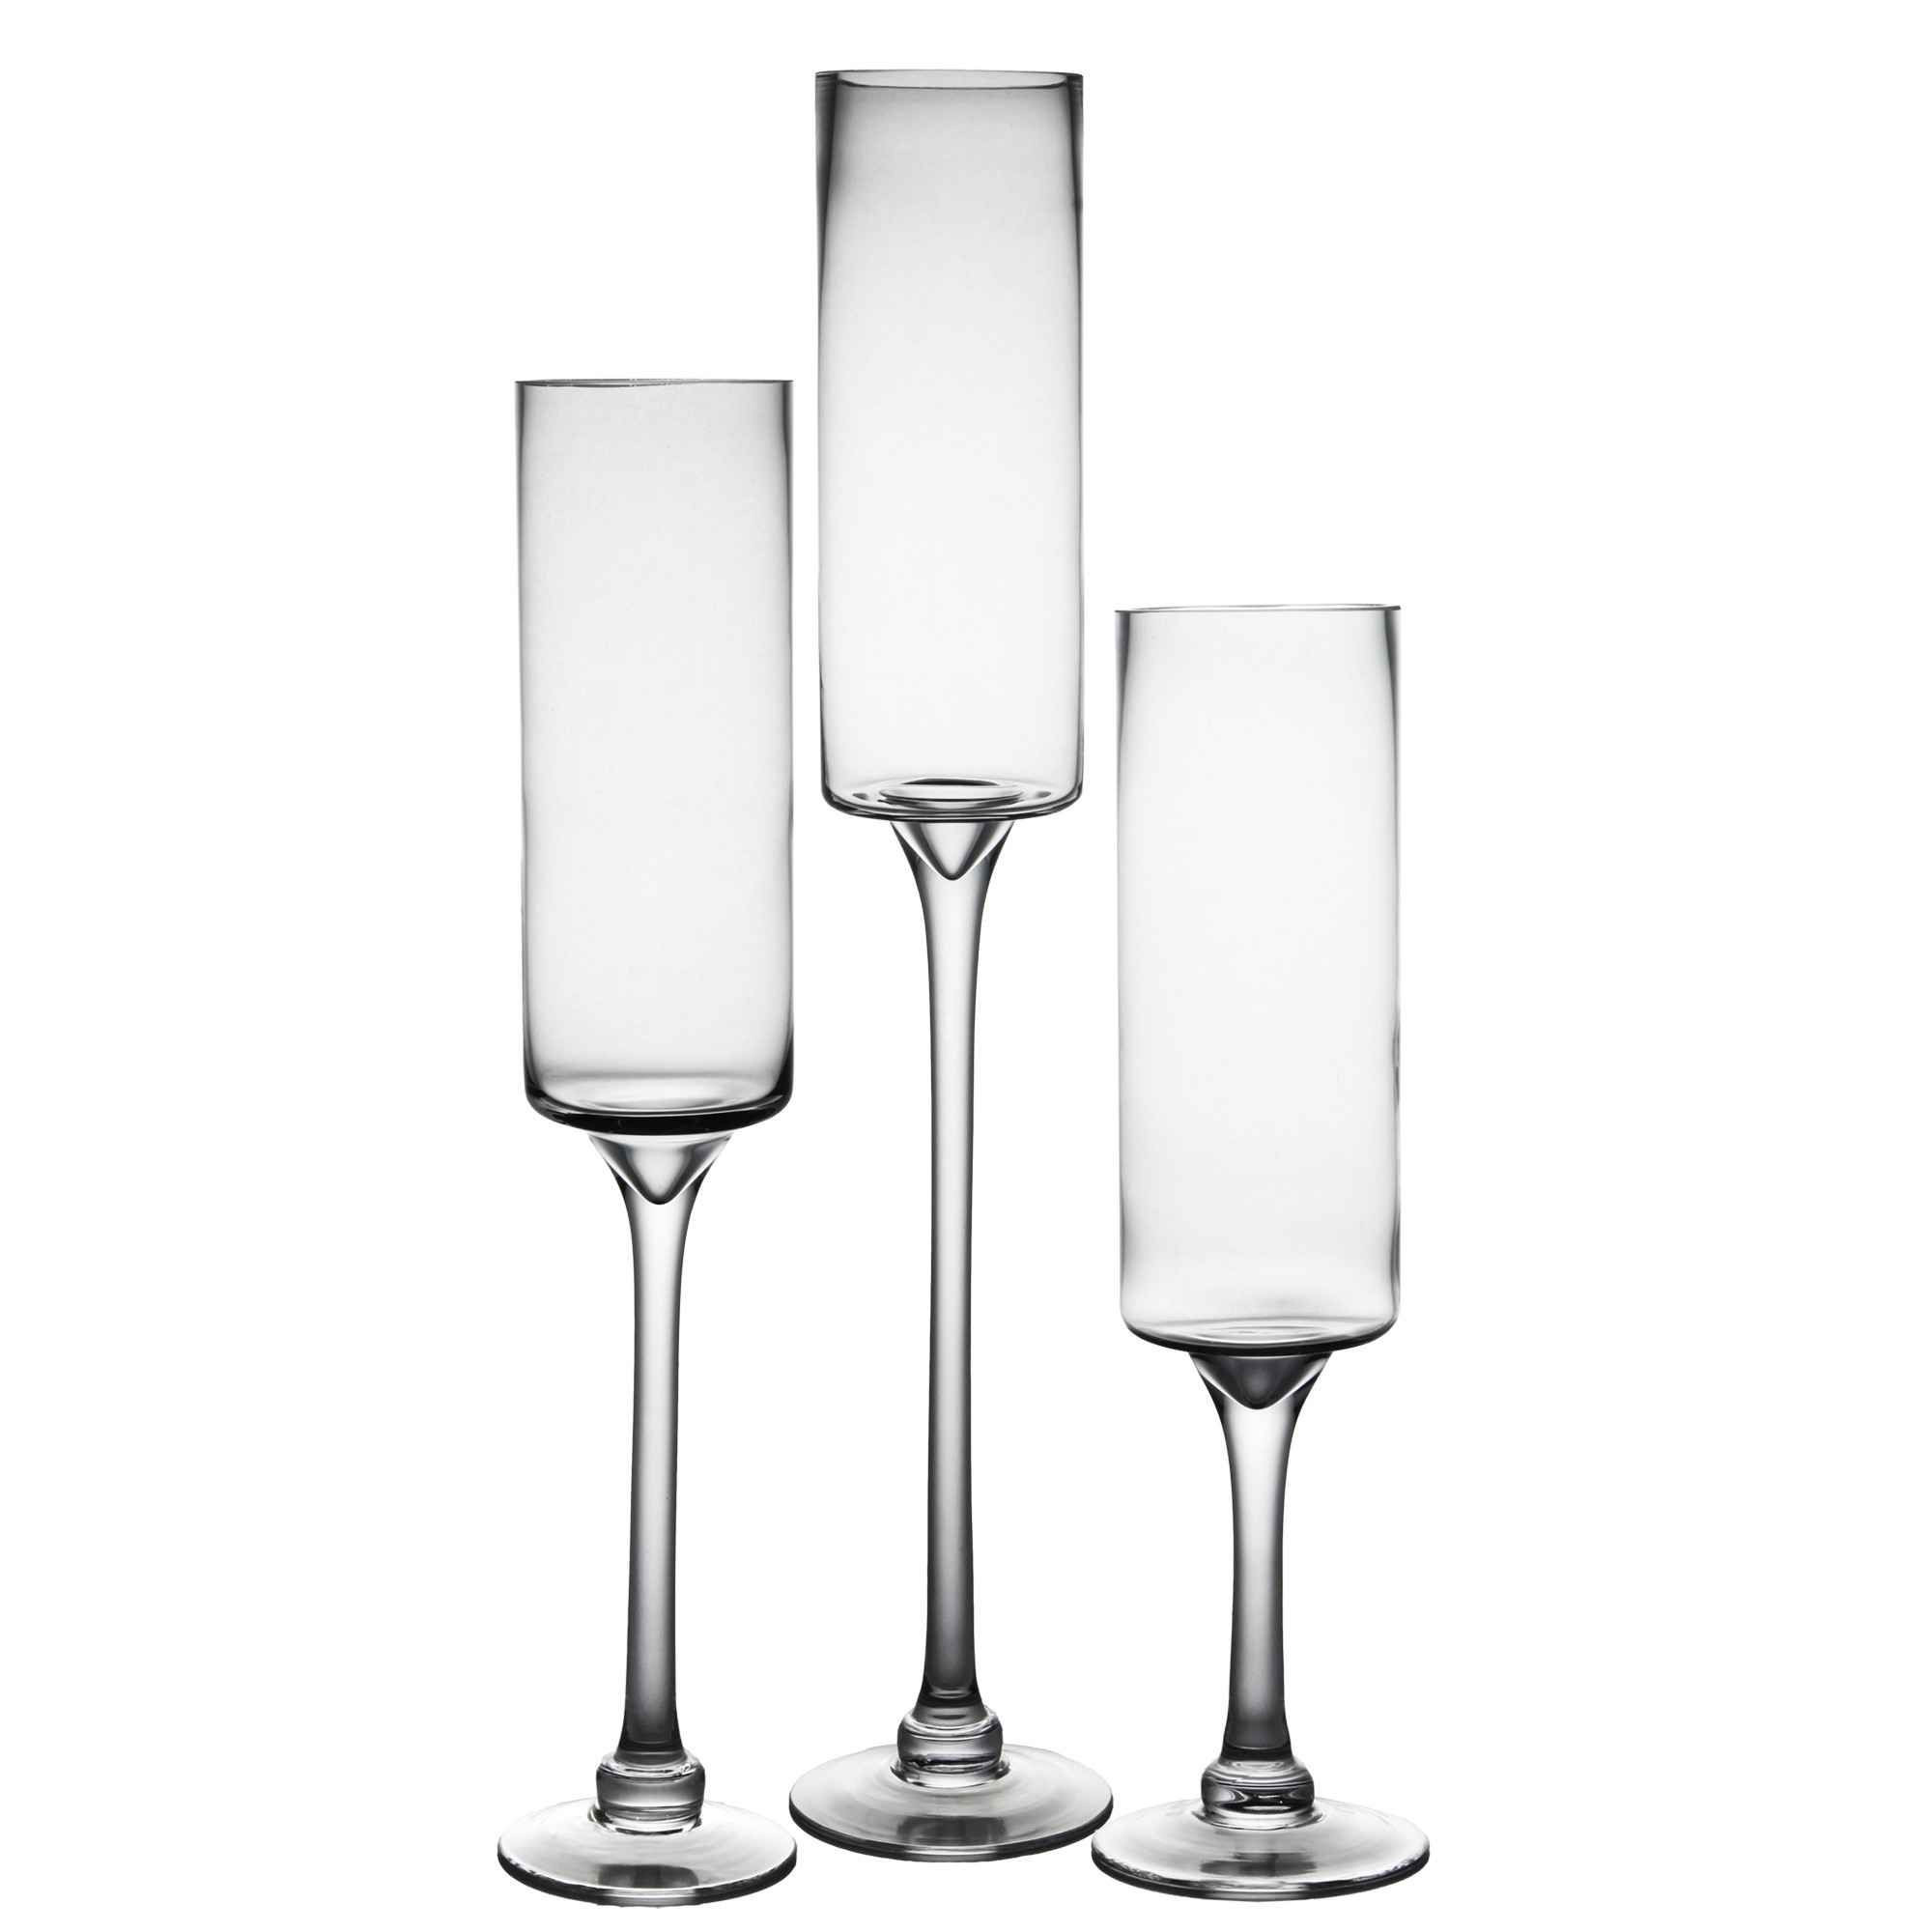 29 Nice Glass Vases Near Me 2024 free download glass vases near me of big glass vase beautiful l h vases 12 inch hurricane clear glass throughout big glass vase beautiful l h vases 12 inch hurricane clear glass vase i 0d cheap in